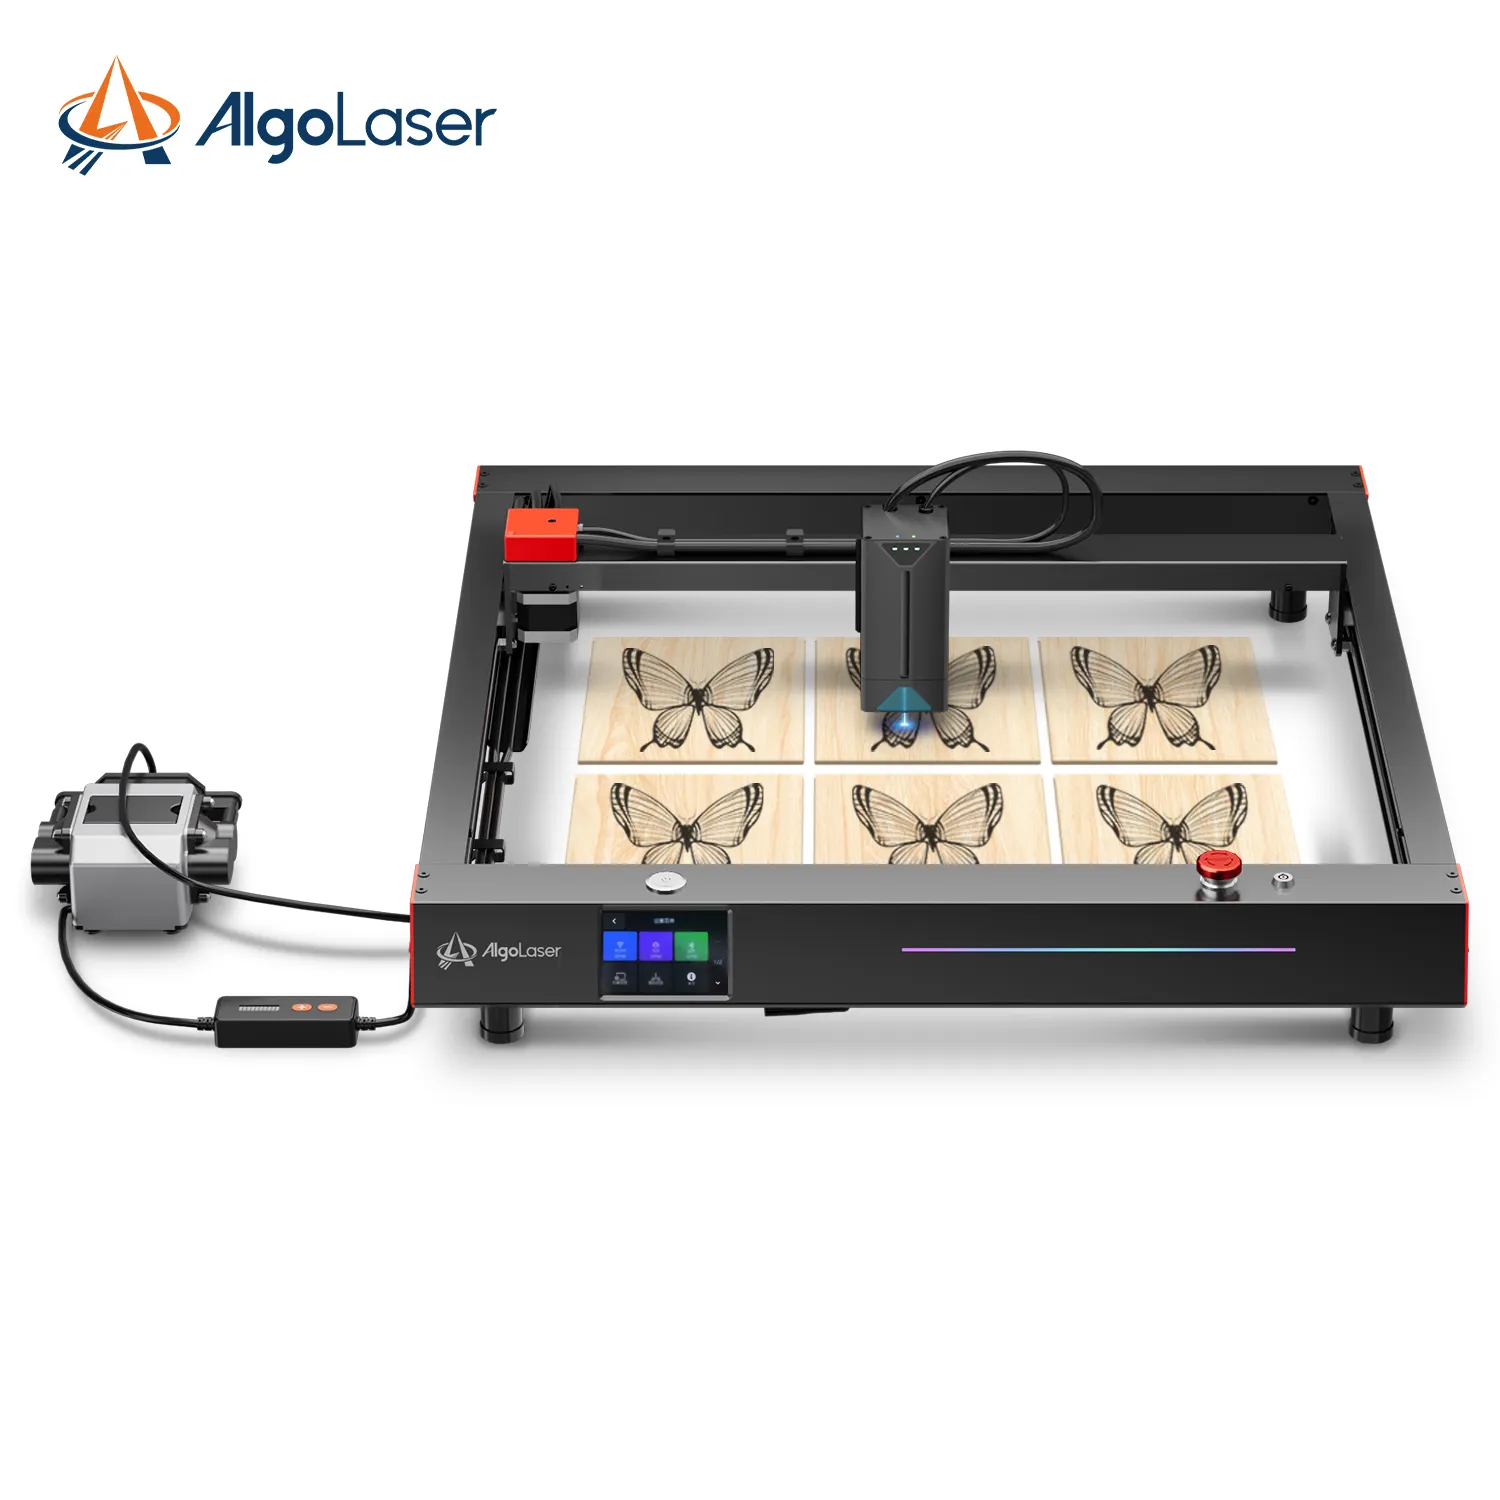 Algolaser Delta 22W Laser Engraving Machine 500mm/s Most Fast Engraving Speed Lazer Engraver and Printer on Leaves